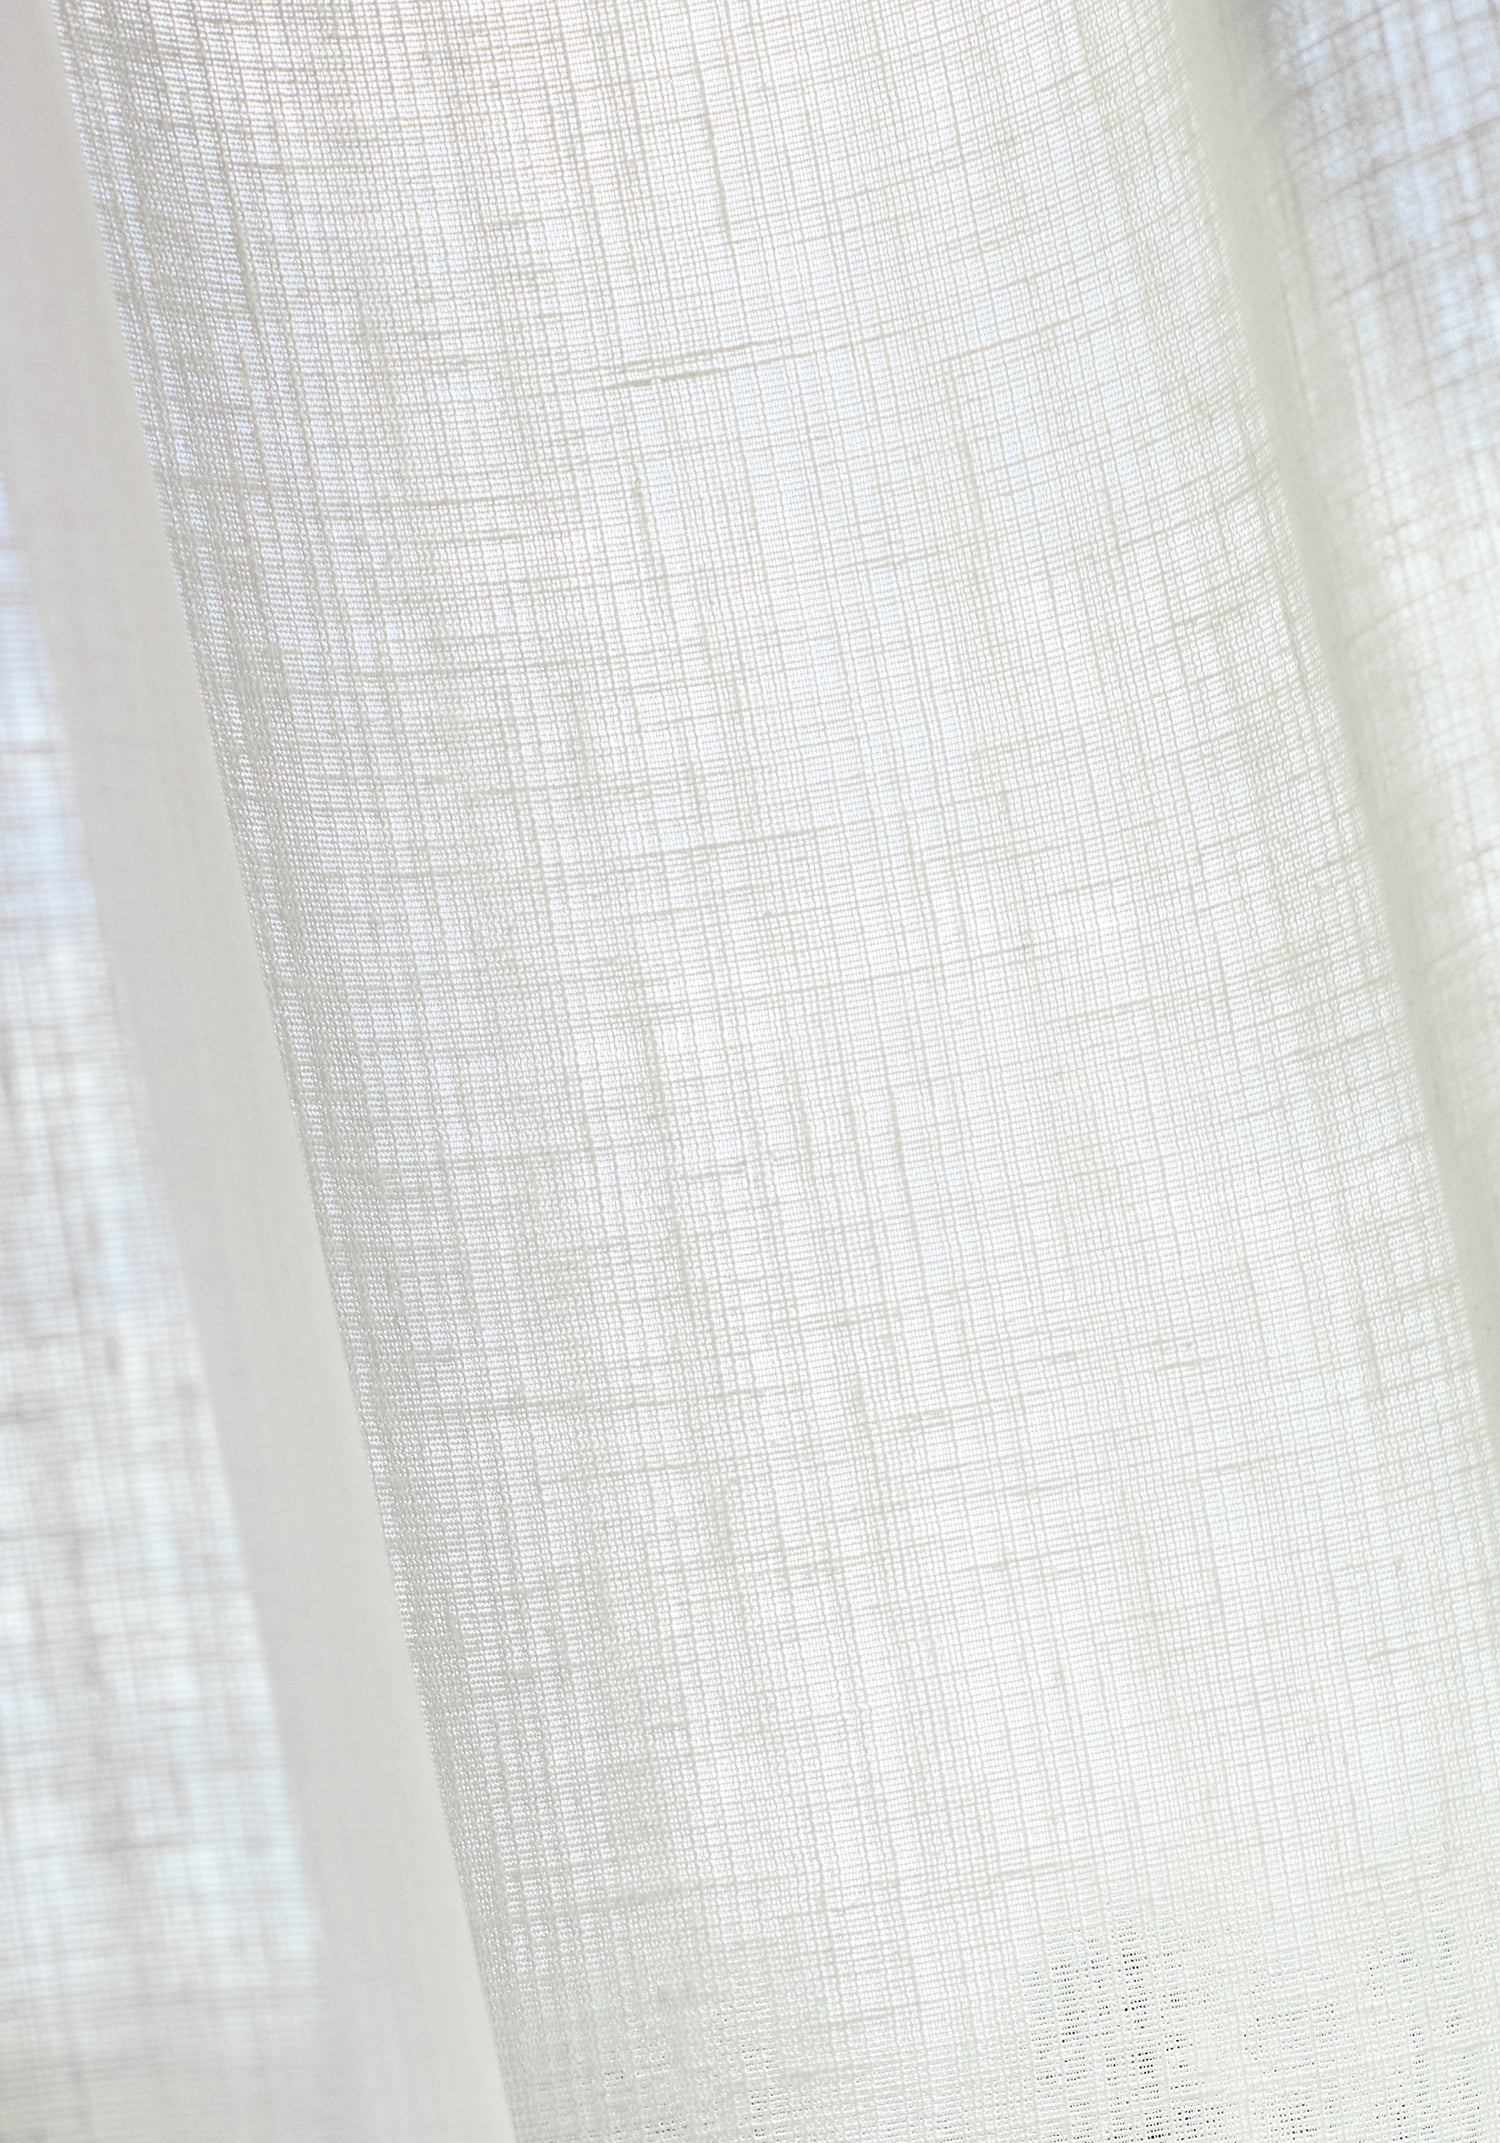 Up close sheer in Striato fabric in snow white color - pattern number FWW8240 - by Thibaut in the Aura collection